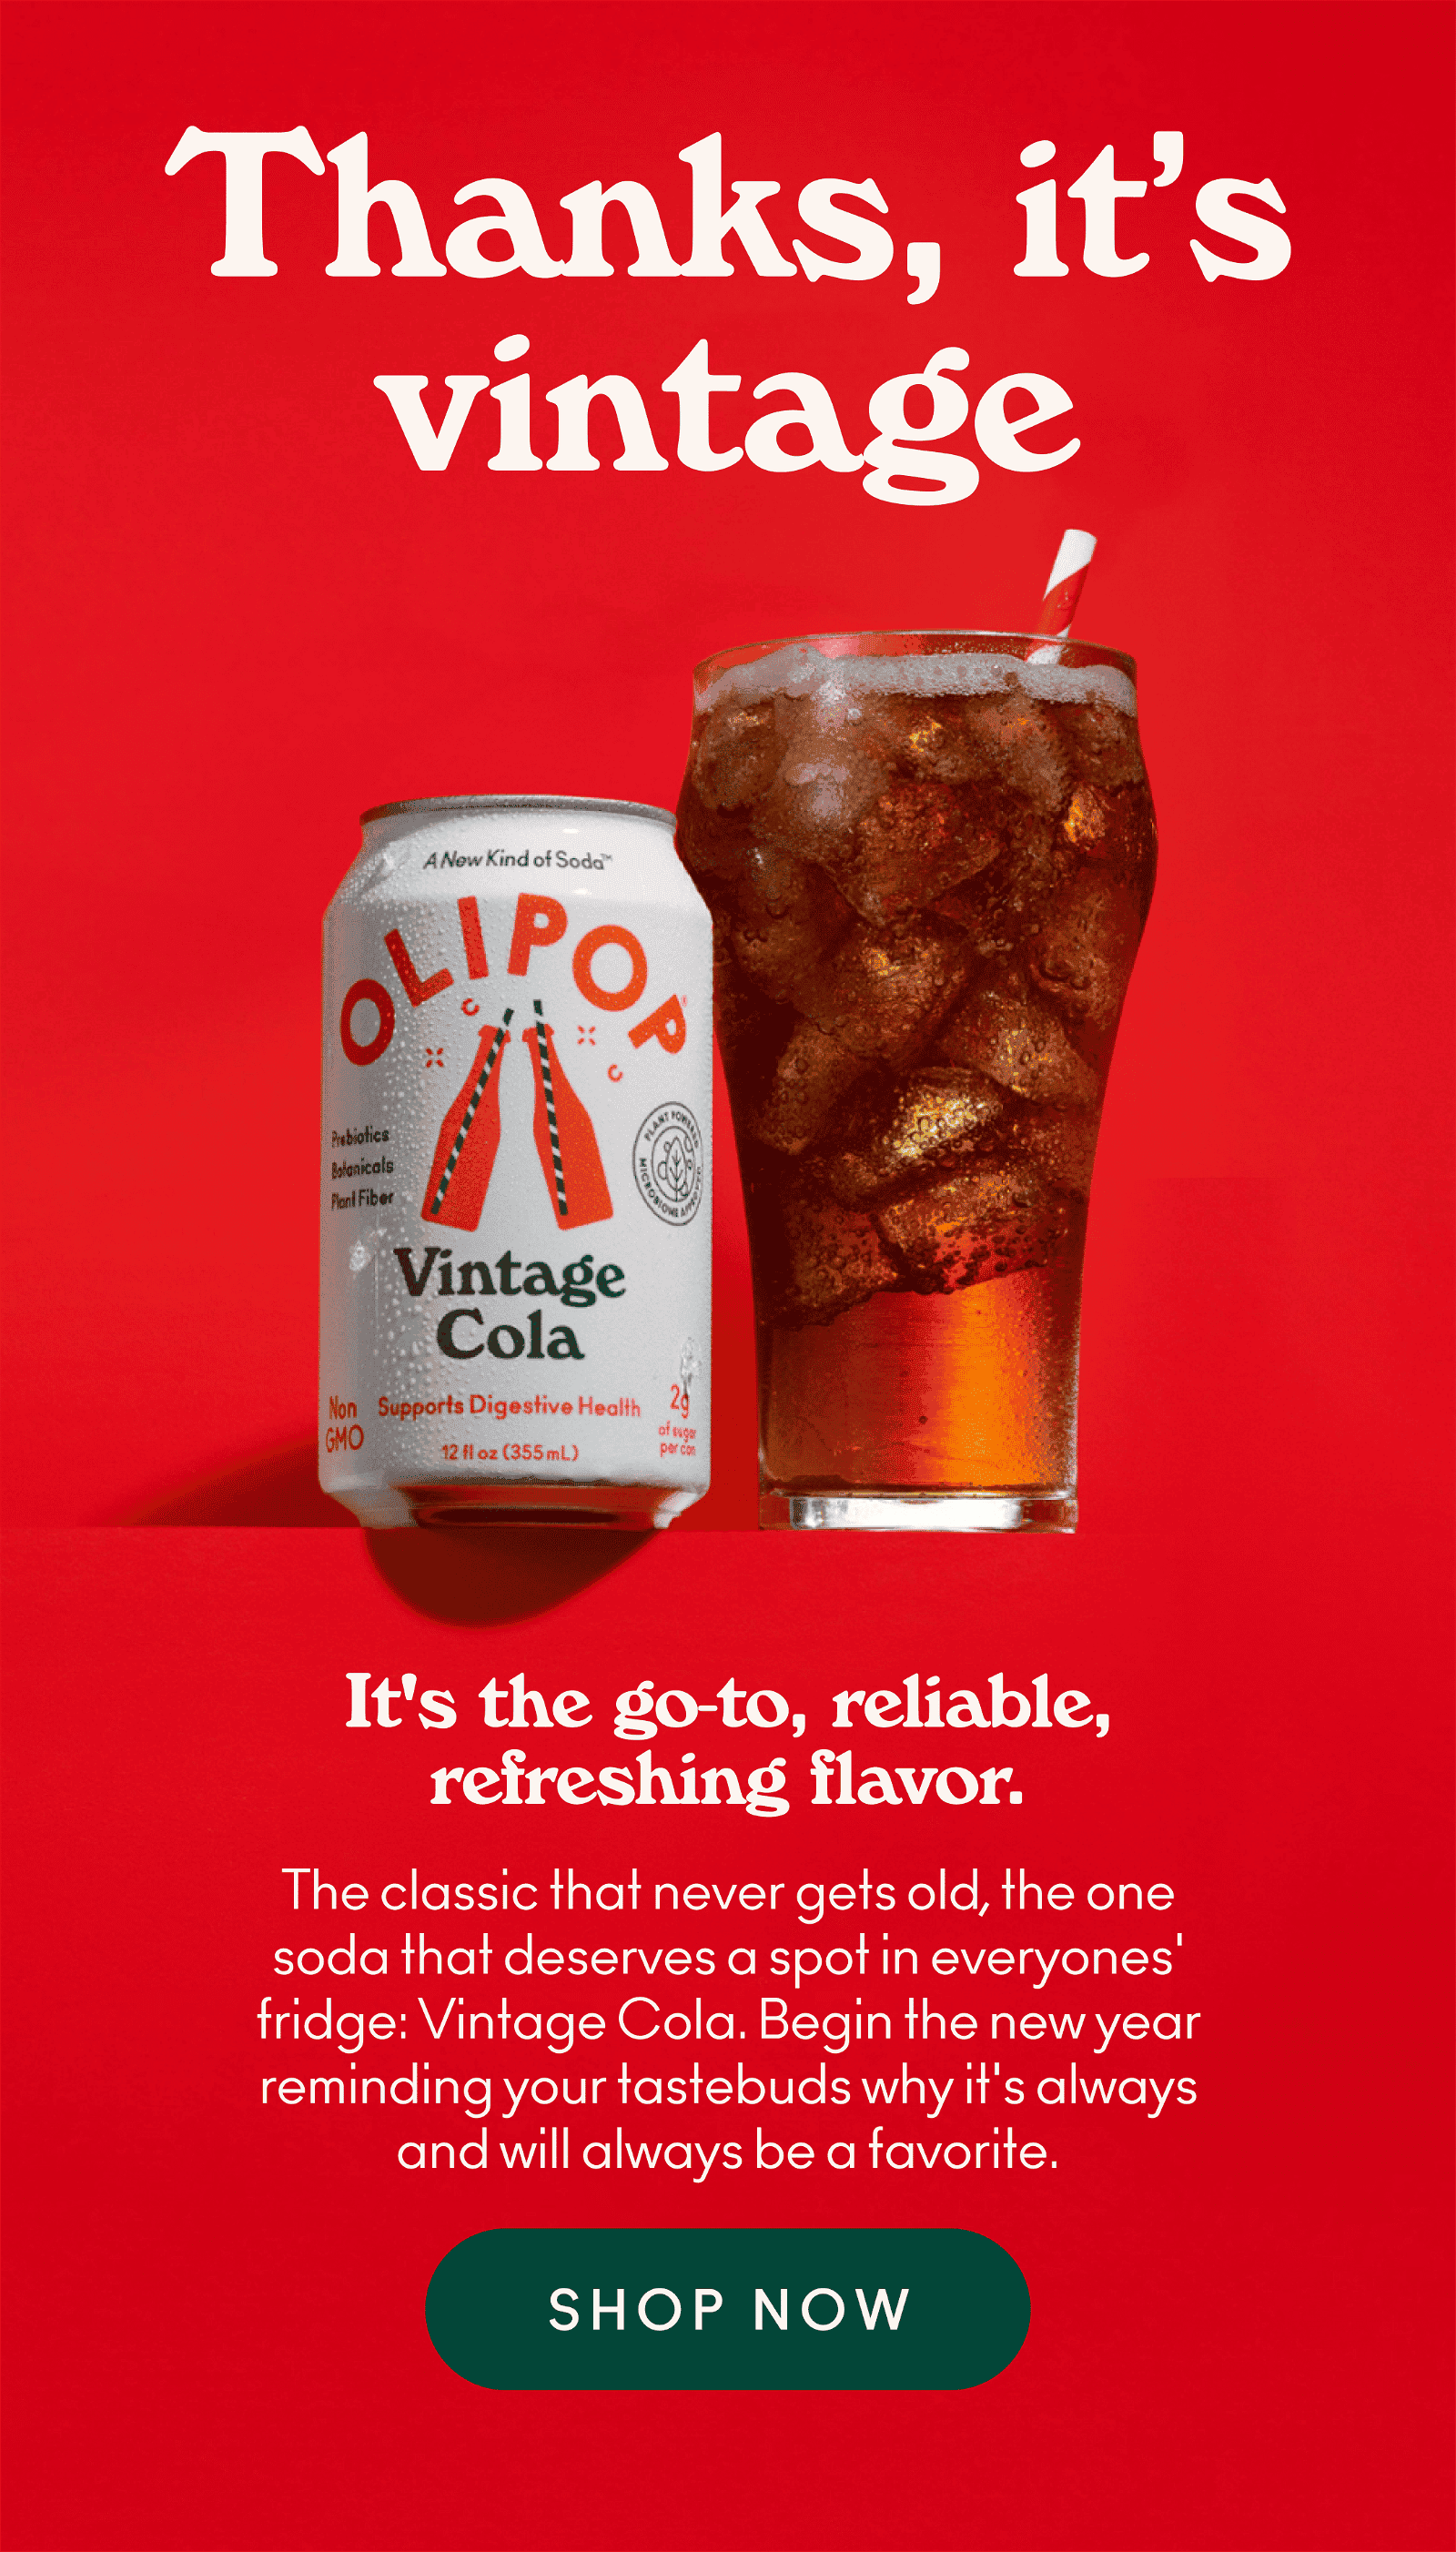 Thanks, it's vintage - Vintage Cola. It's the go-to, reliable, refreshing flavor. The classic that never gets old, the one soda that deserves a spot in everyone' fridge. begin the new year reminding your tastebuds why it's always and will always be a favorite.